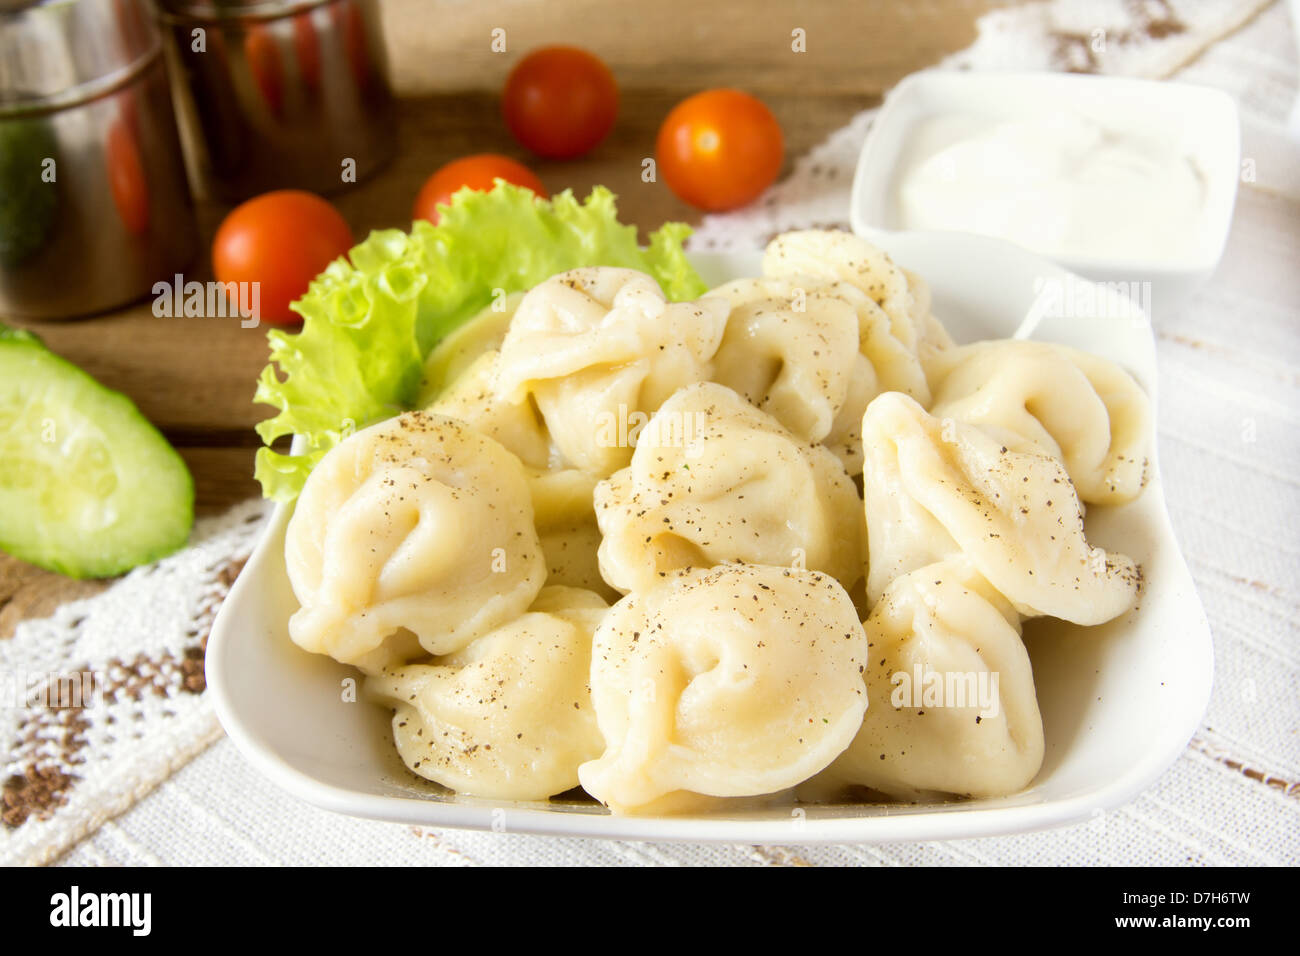 Meat dumplings (russian pelmeni) with pepper, vegetables and sour cream in bowl close up Stock Photo